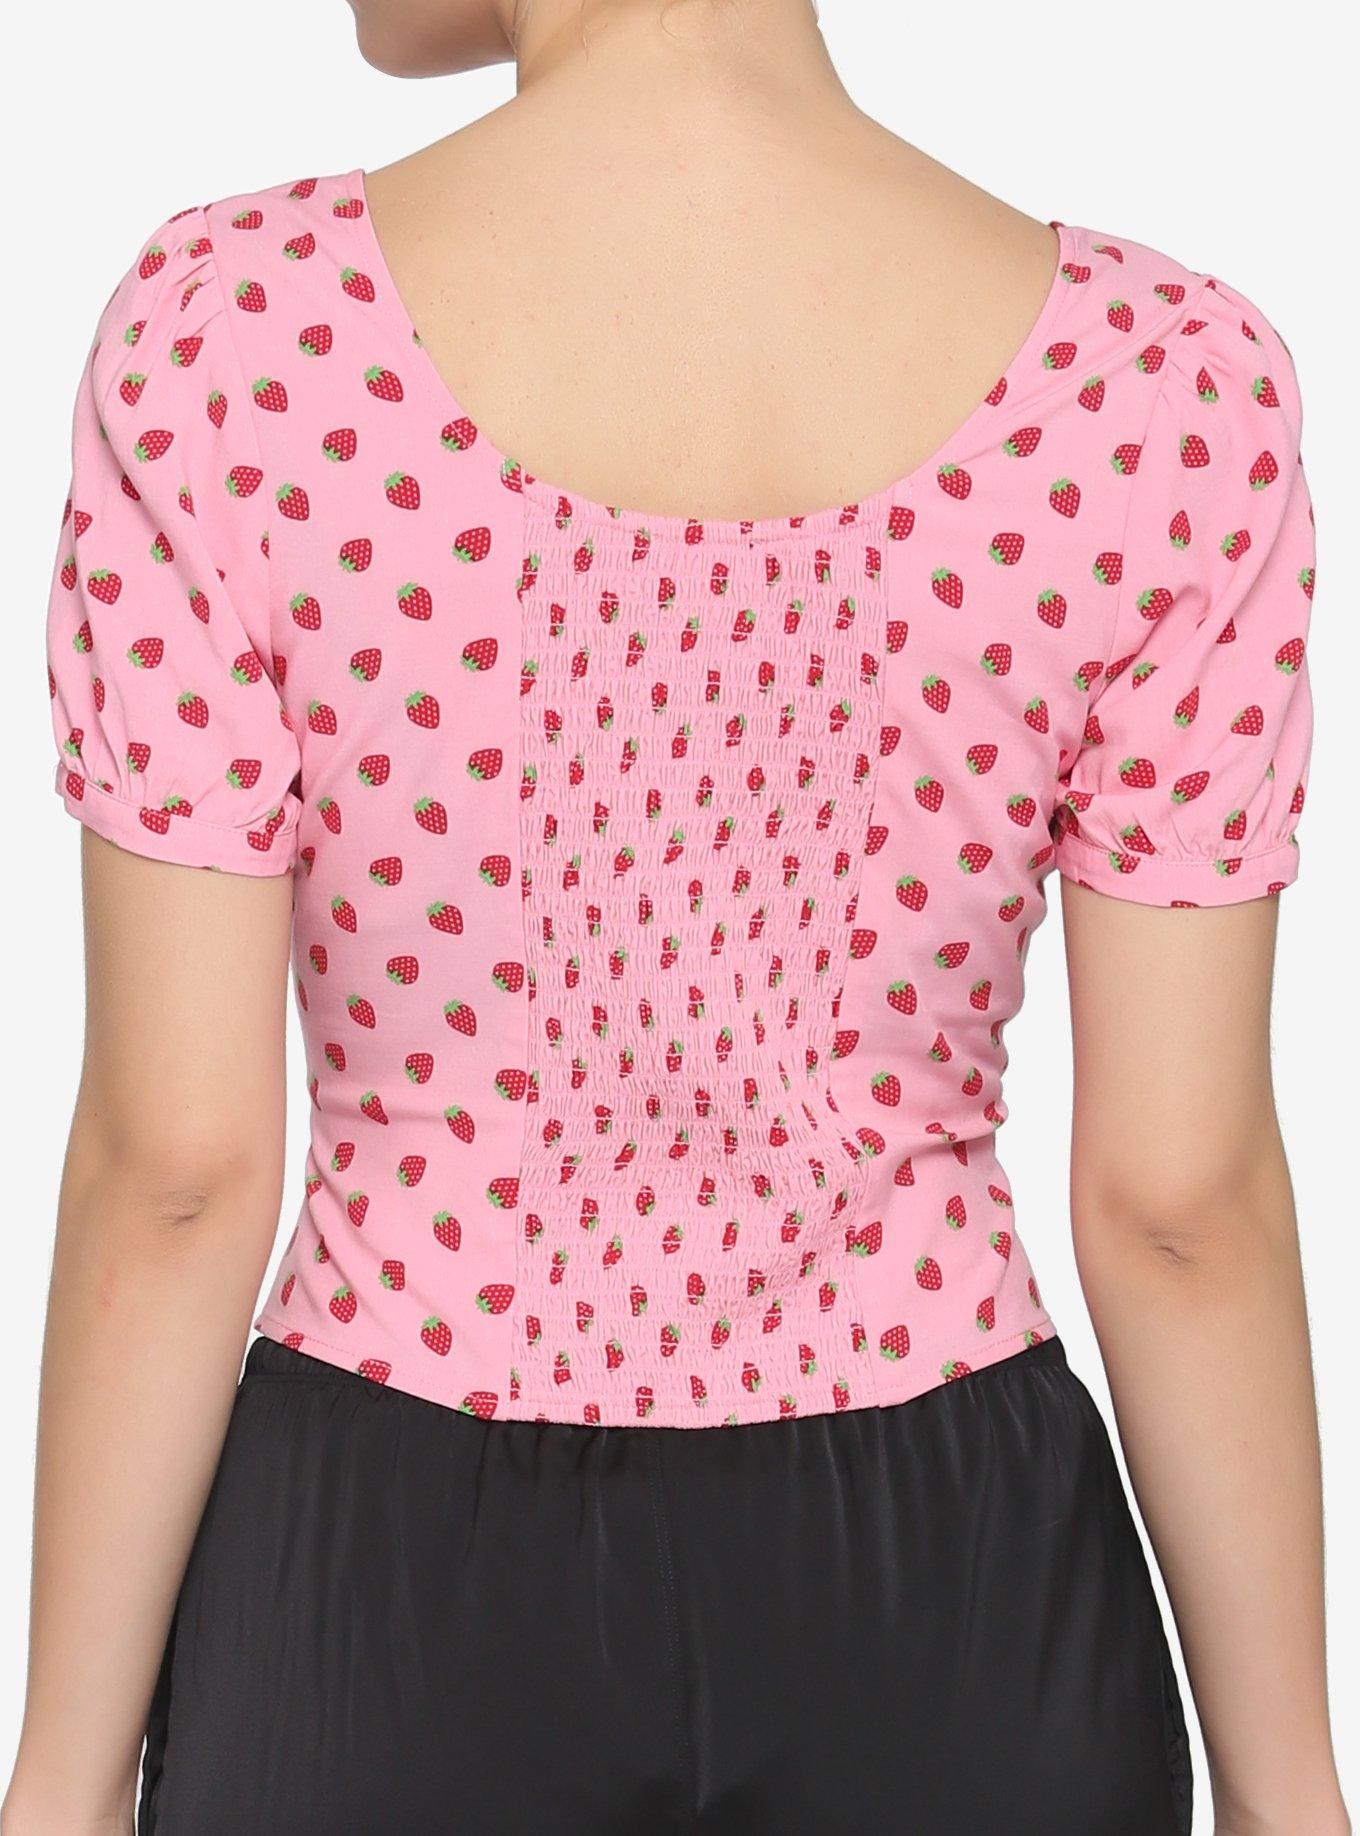 Strawberry Lace-Up Girls Crop Woven Top, PINK, alternate